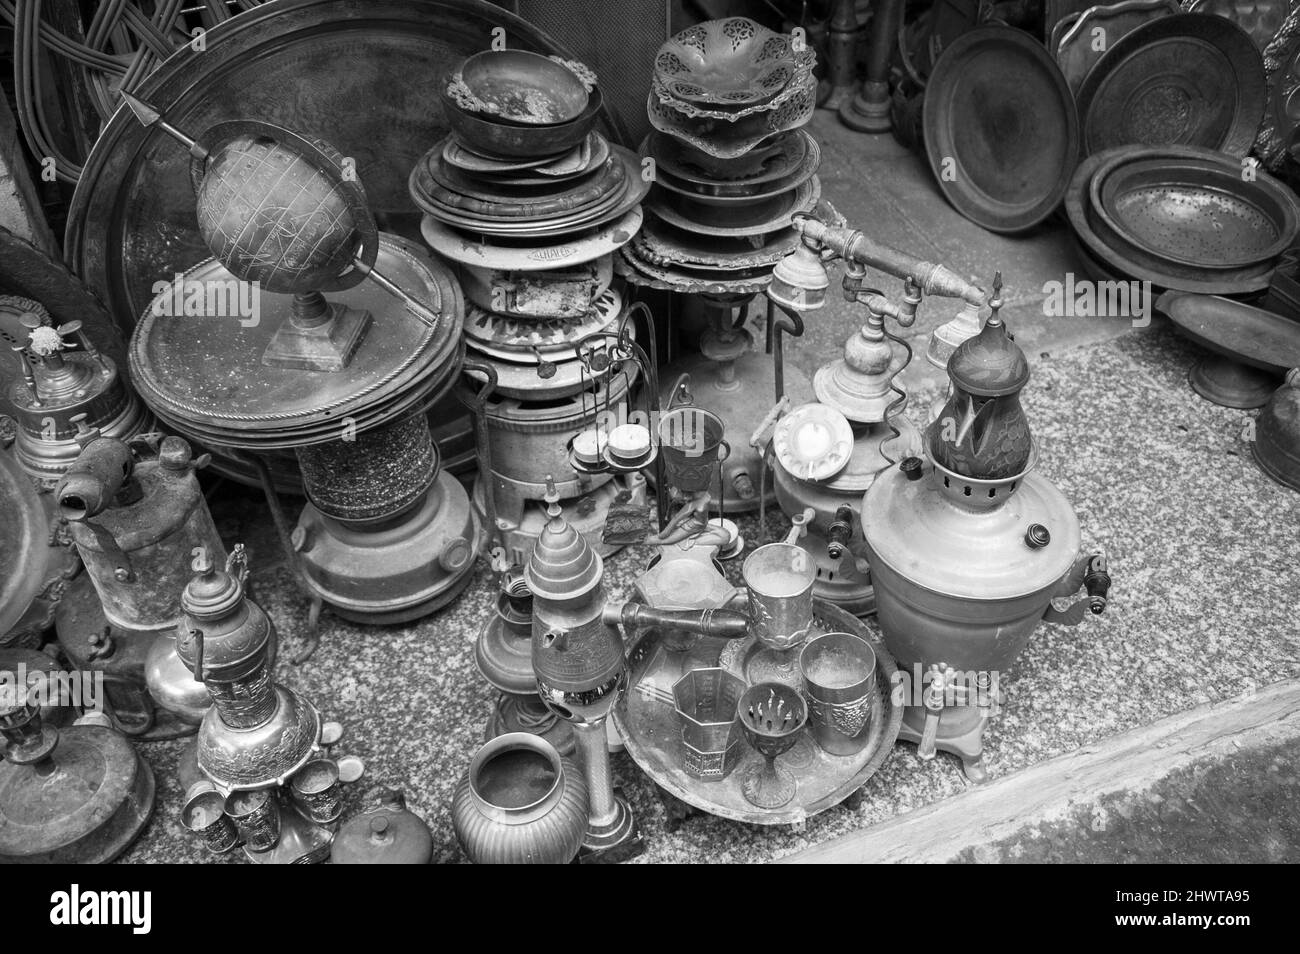 Old kitchenware (trays, teapots, coffee turks, samovars, pans, plates, cups etc) at the flea market in Old Jaffa, Israel. Black white historic photo Stock Photo